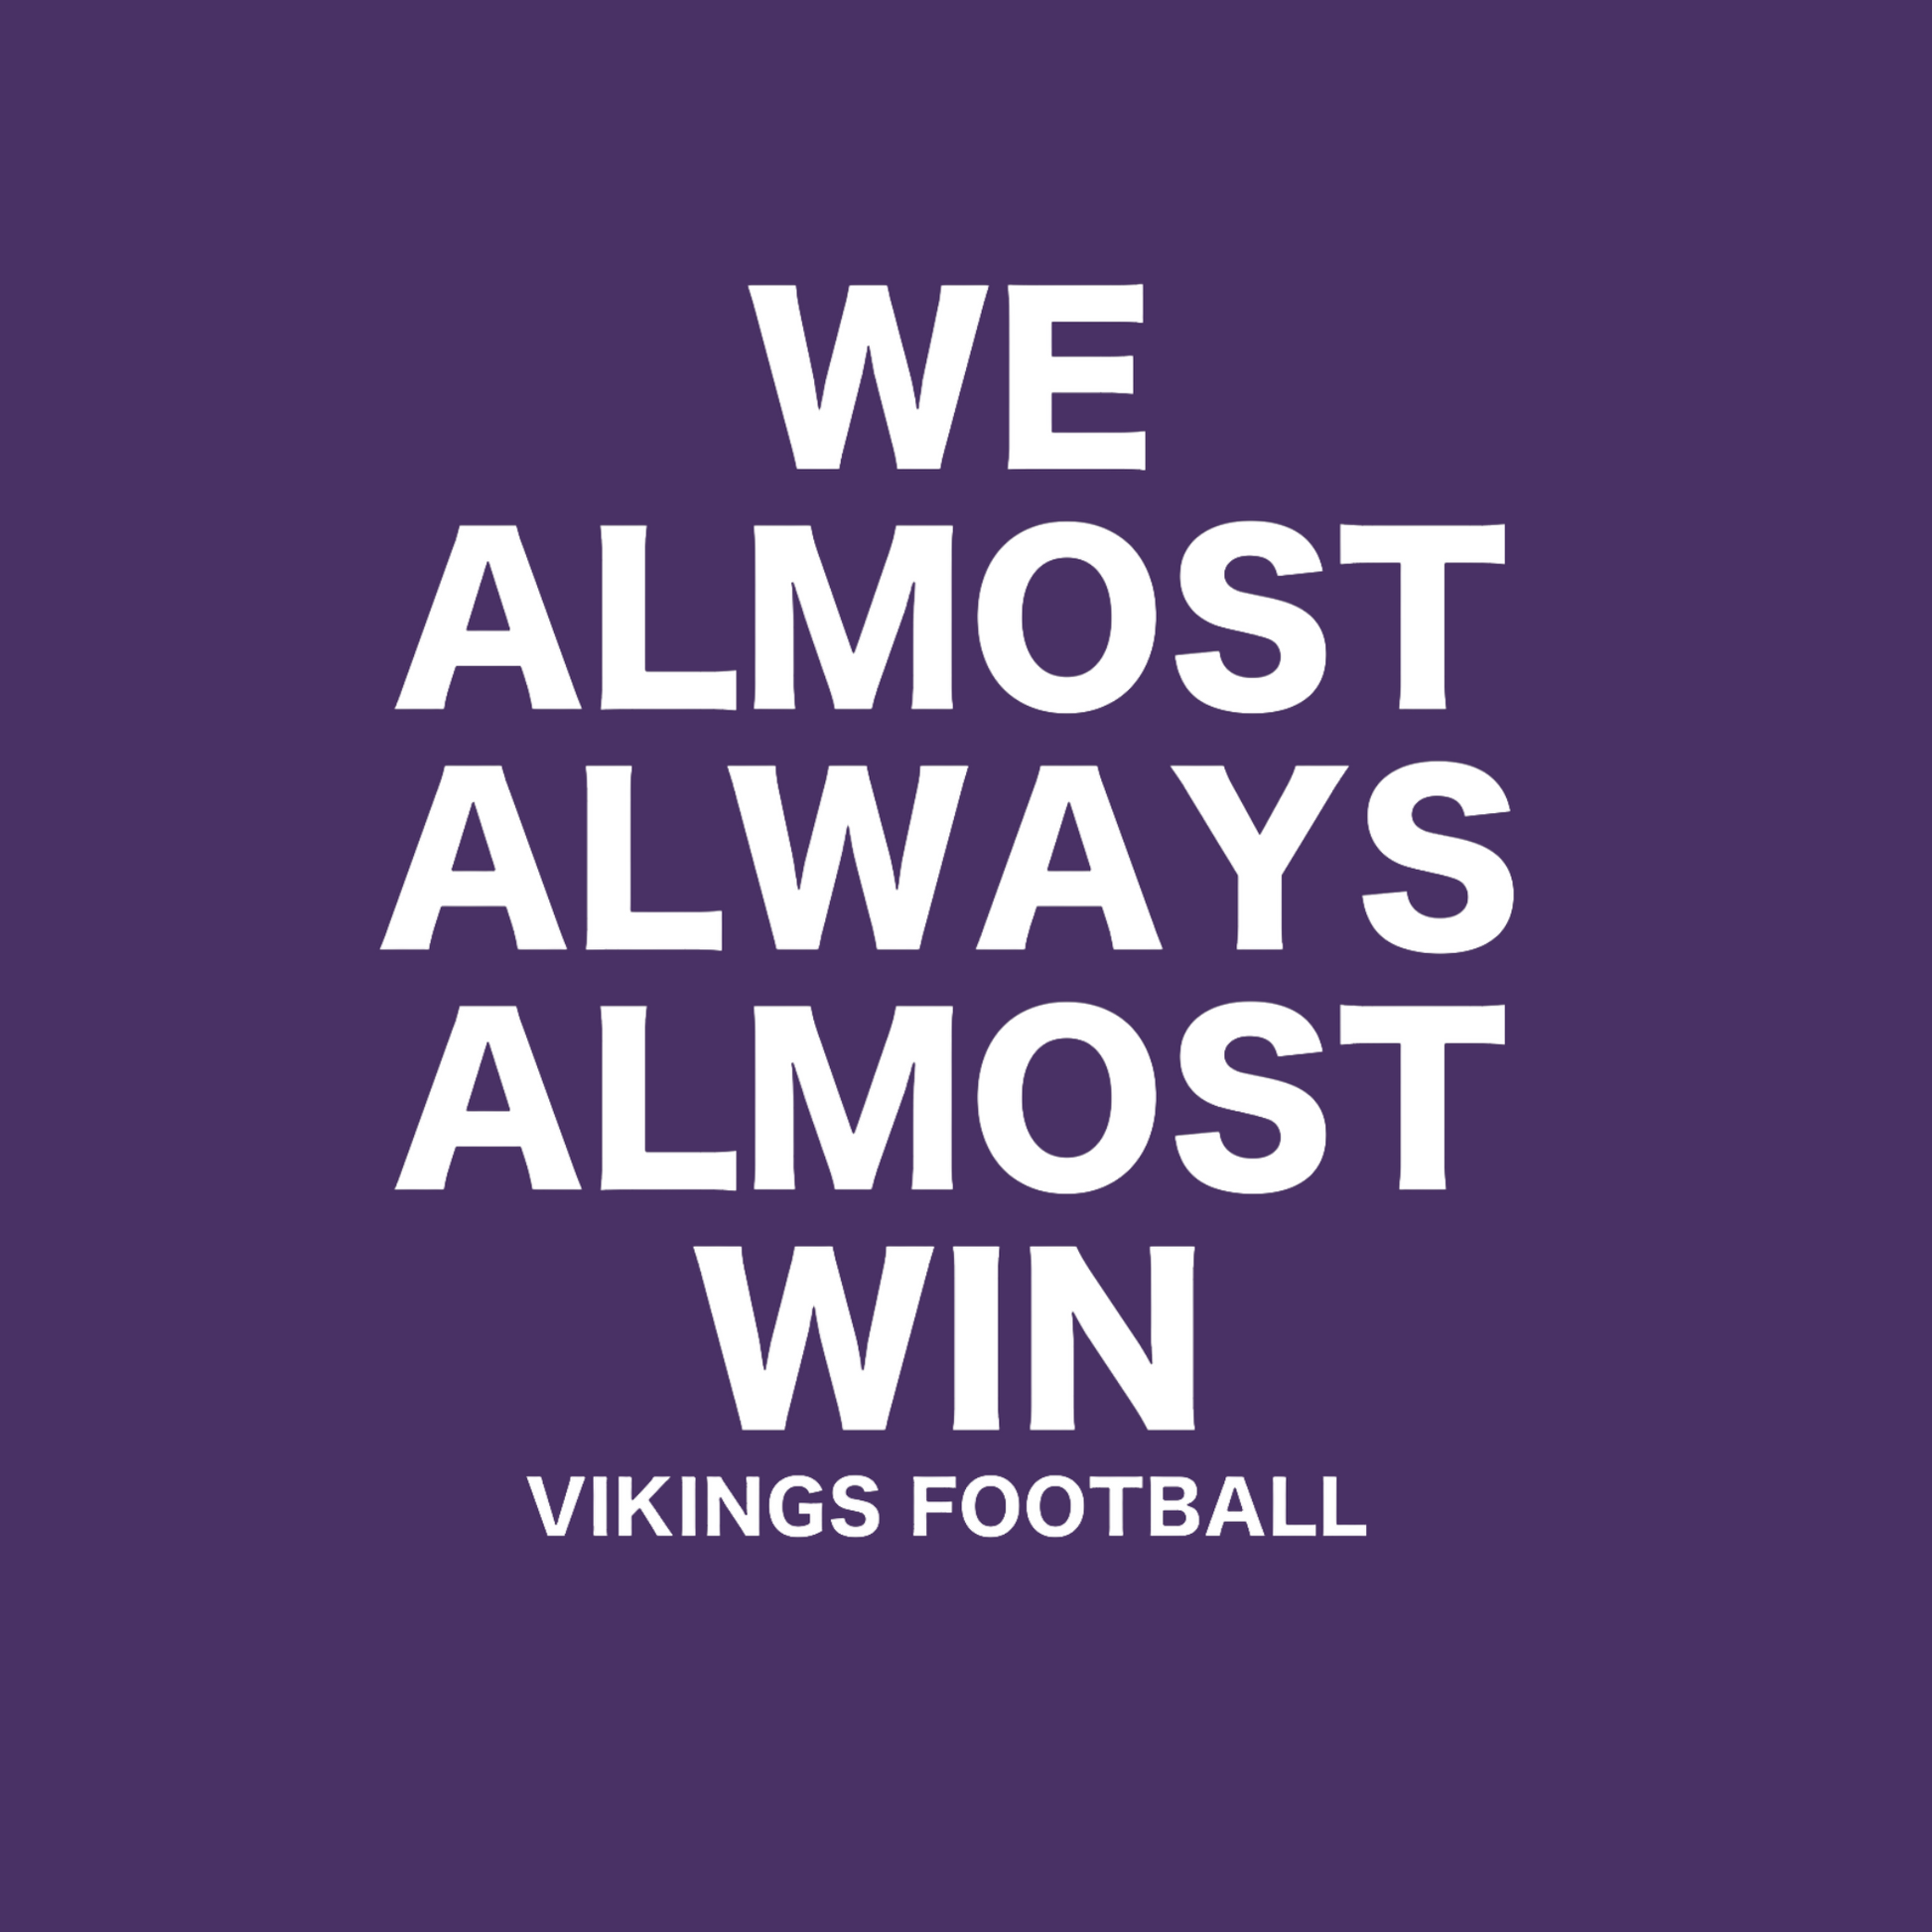 We Almost Always Almost Win Vikings Football Hooded Sweatshirt in purple with white writing. This is a view of the white design on a purple background.